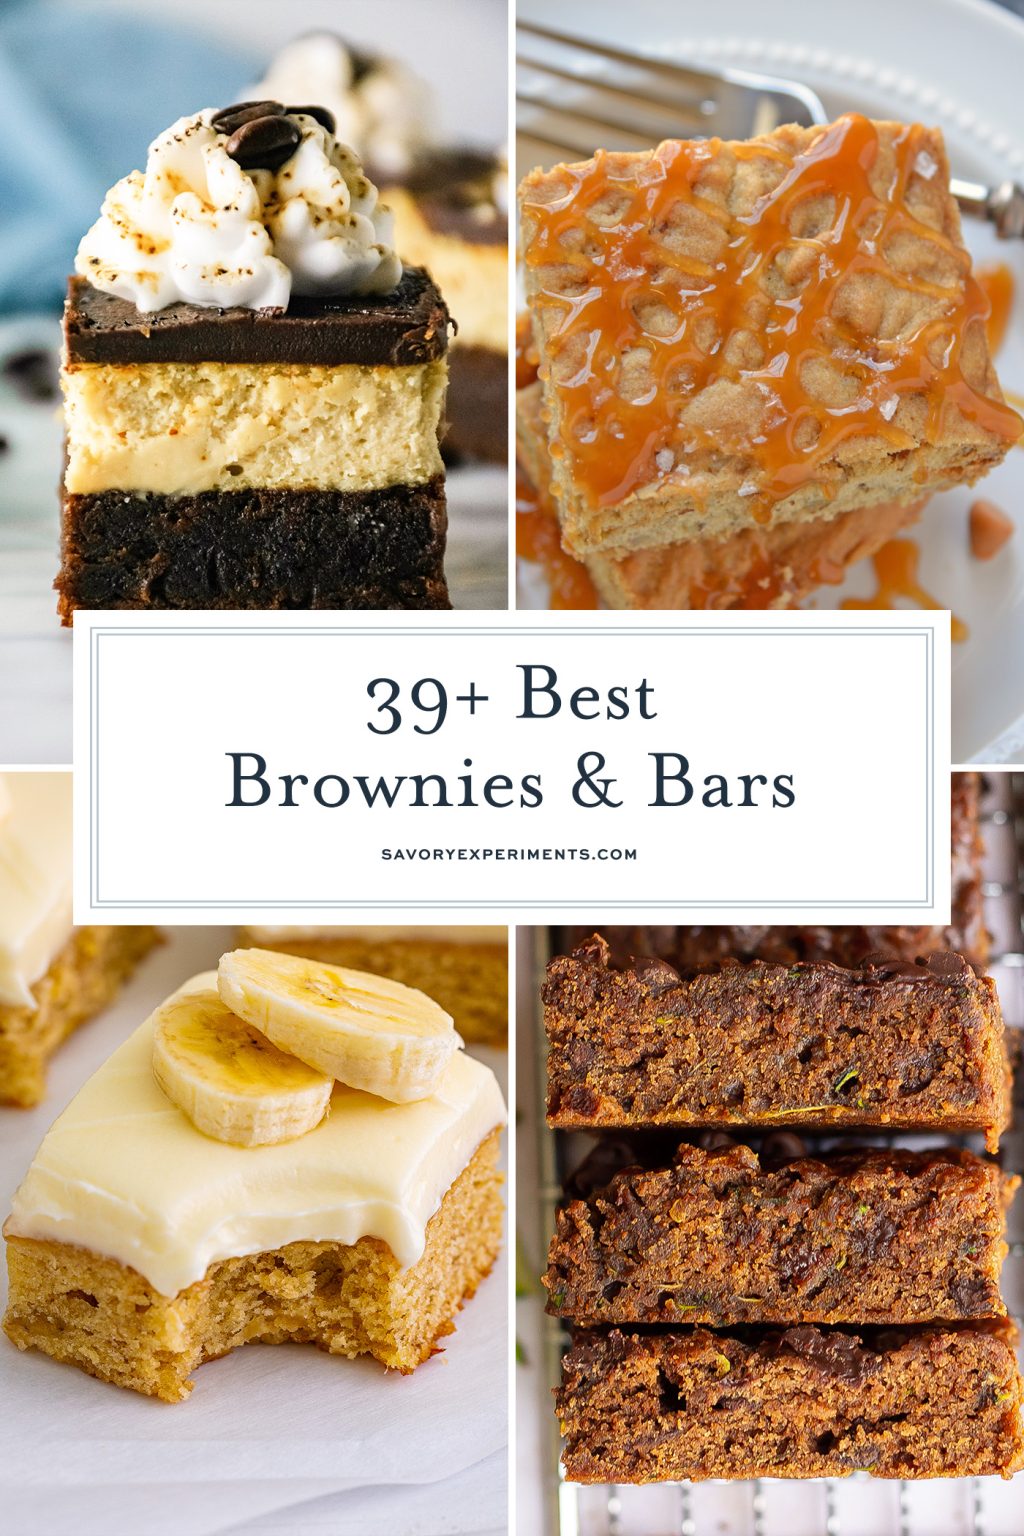 39+ Easy Bar and Brownies Recipes